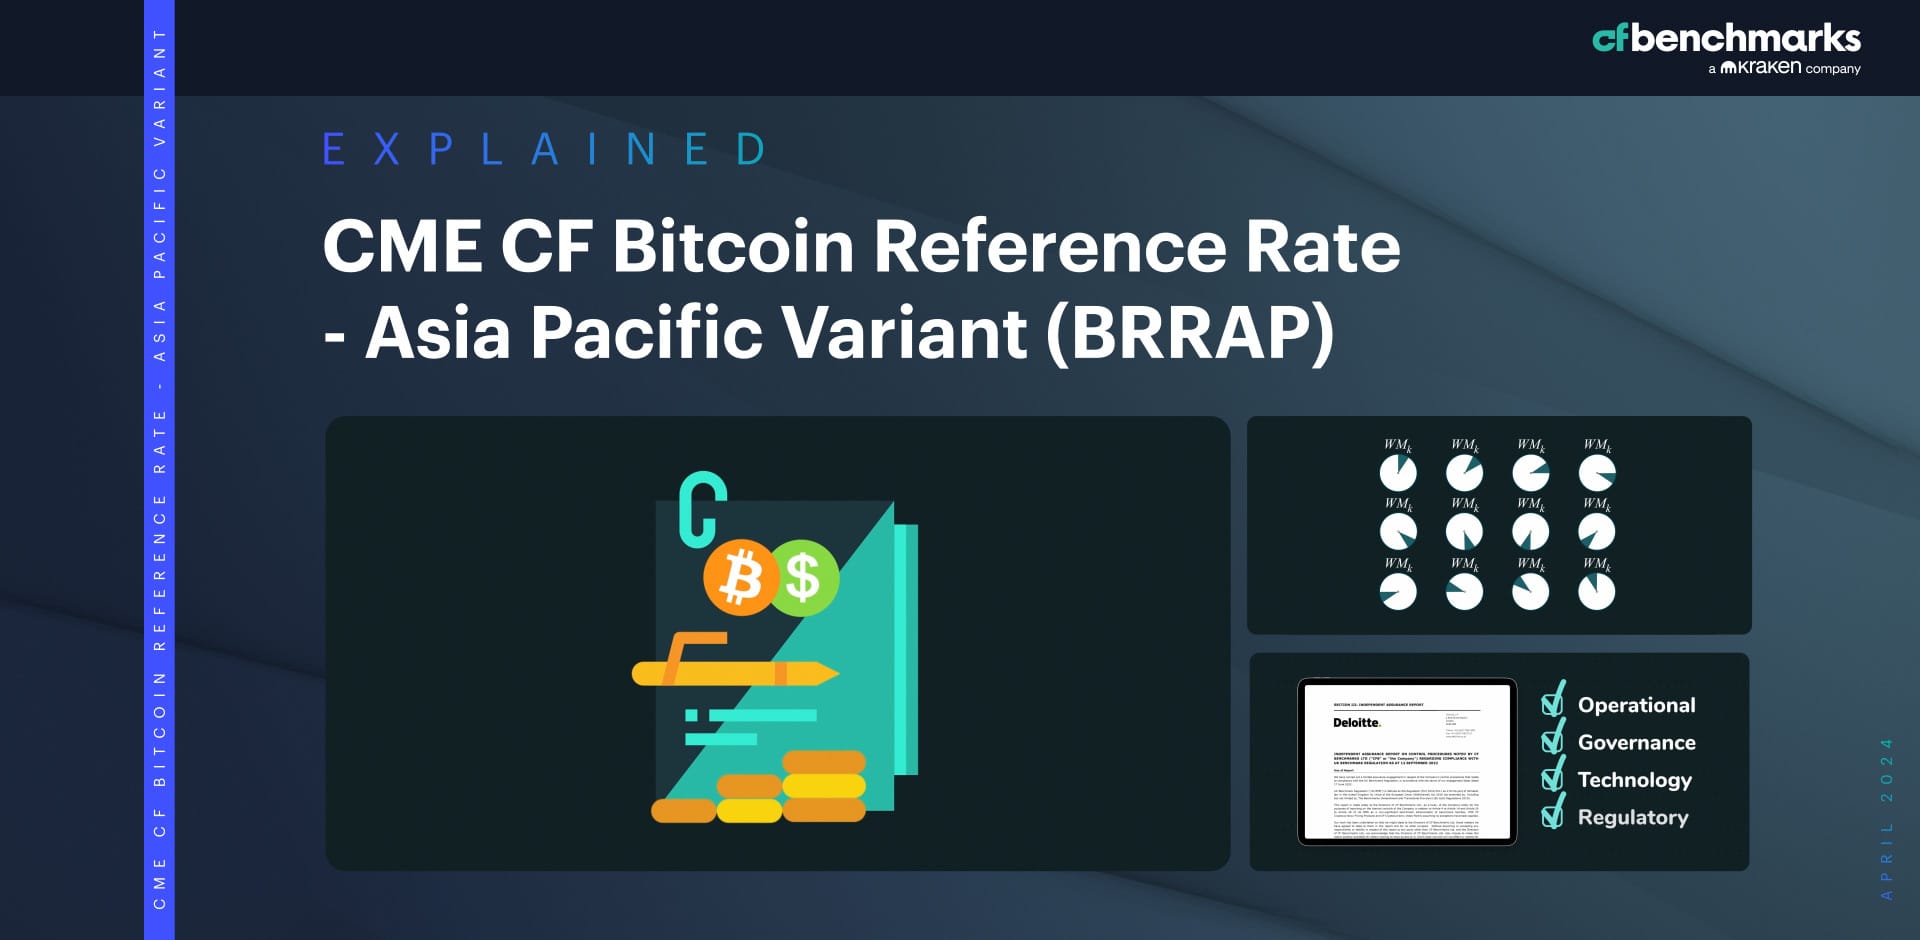 CME CF Bitcoin Reference Rate - Asia Pacific Variant: Explainer Video